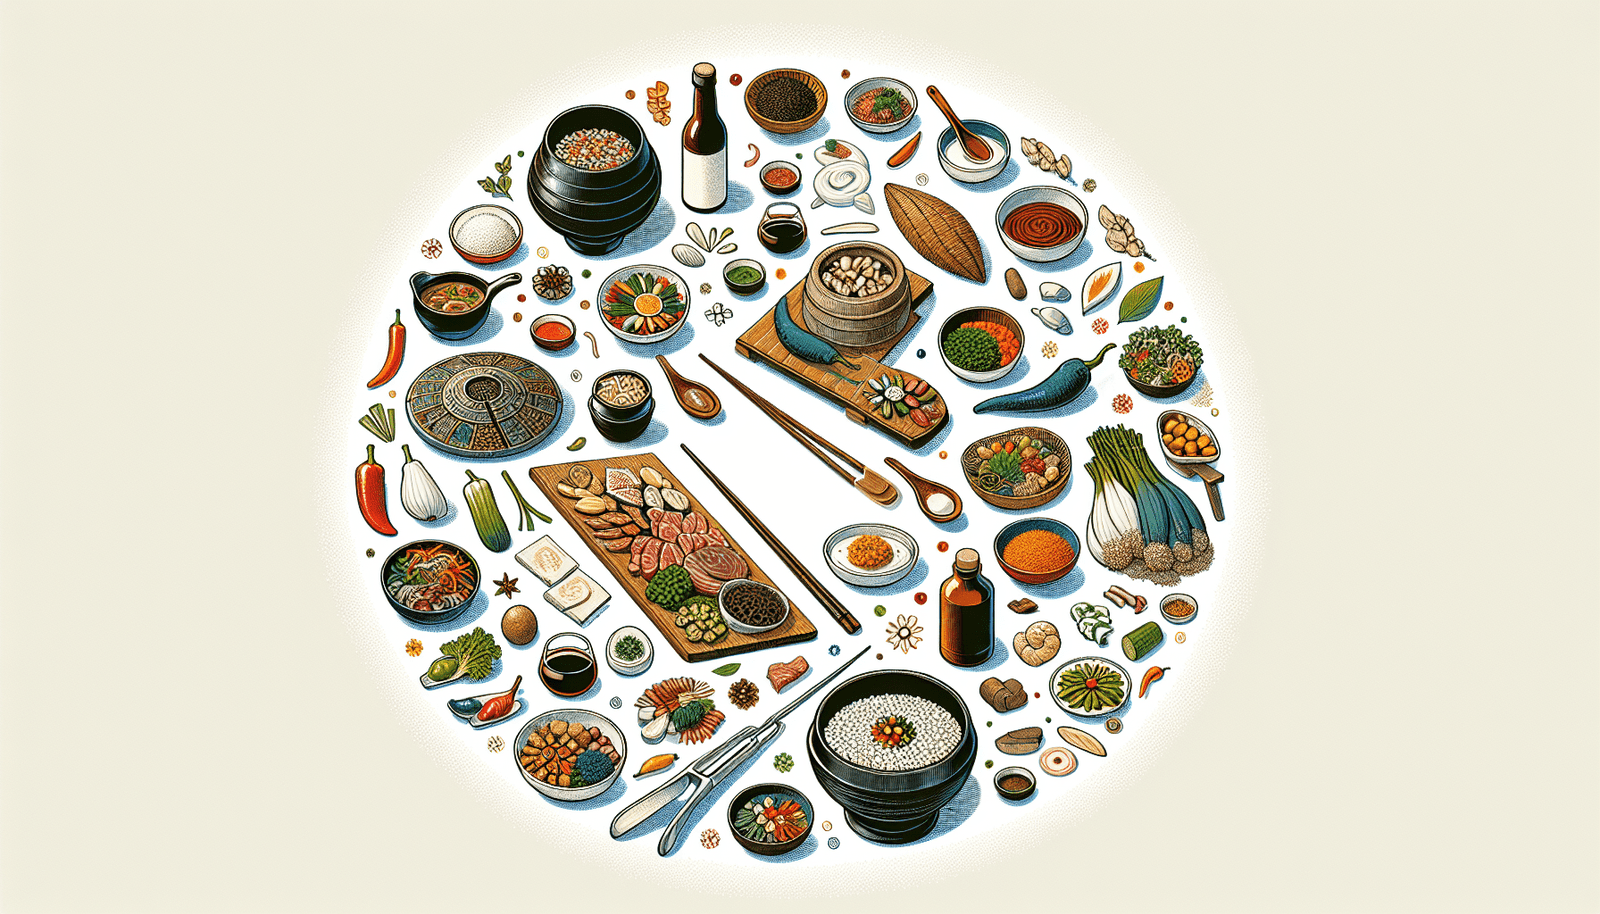 Can You Recommend Some Regional Specialties From Lesser-known Korean Provinces?